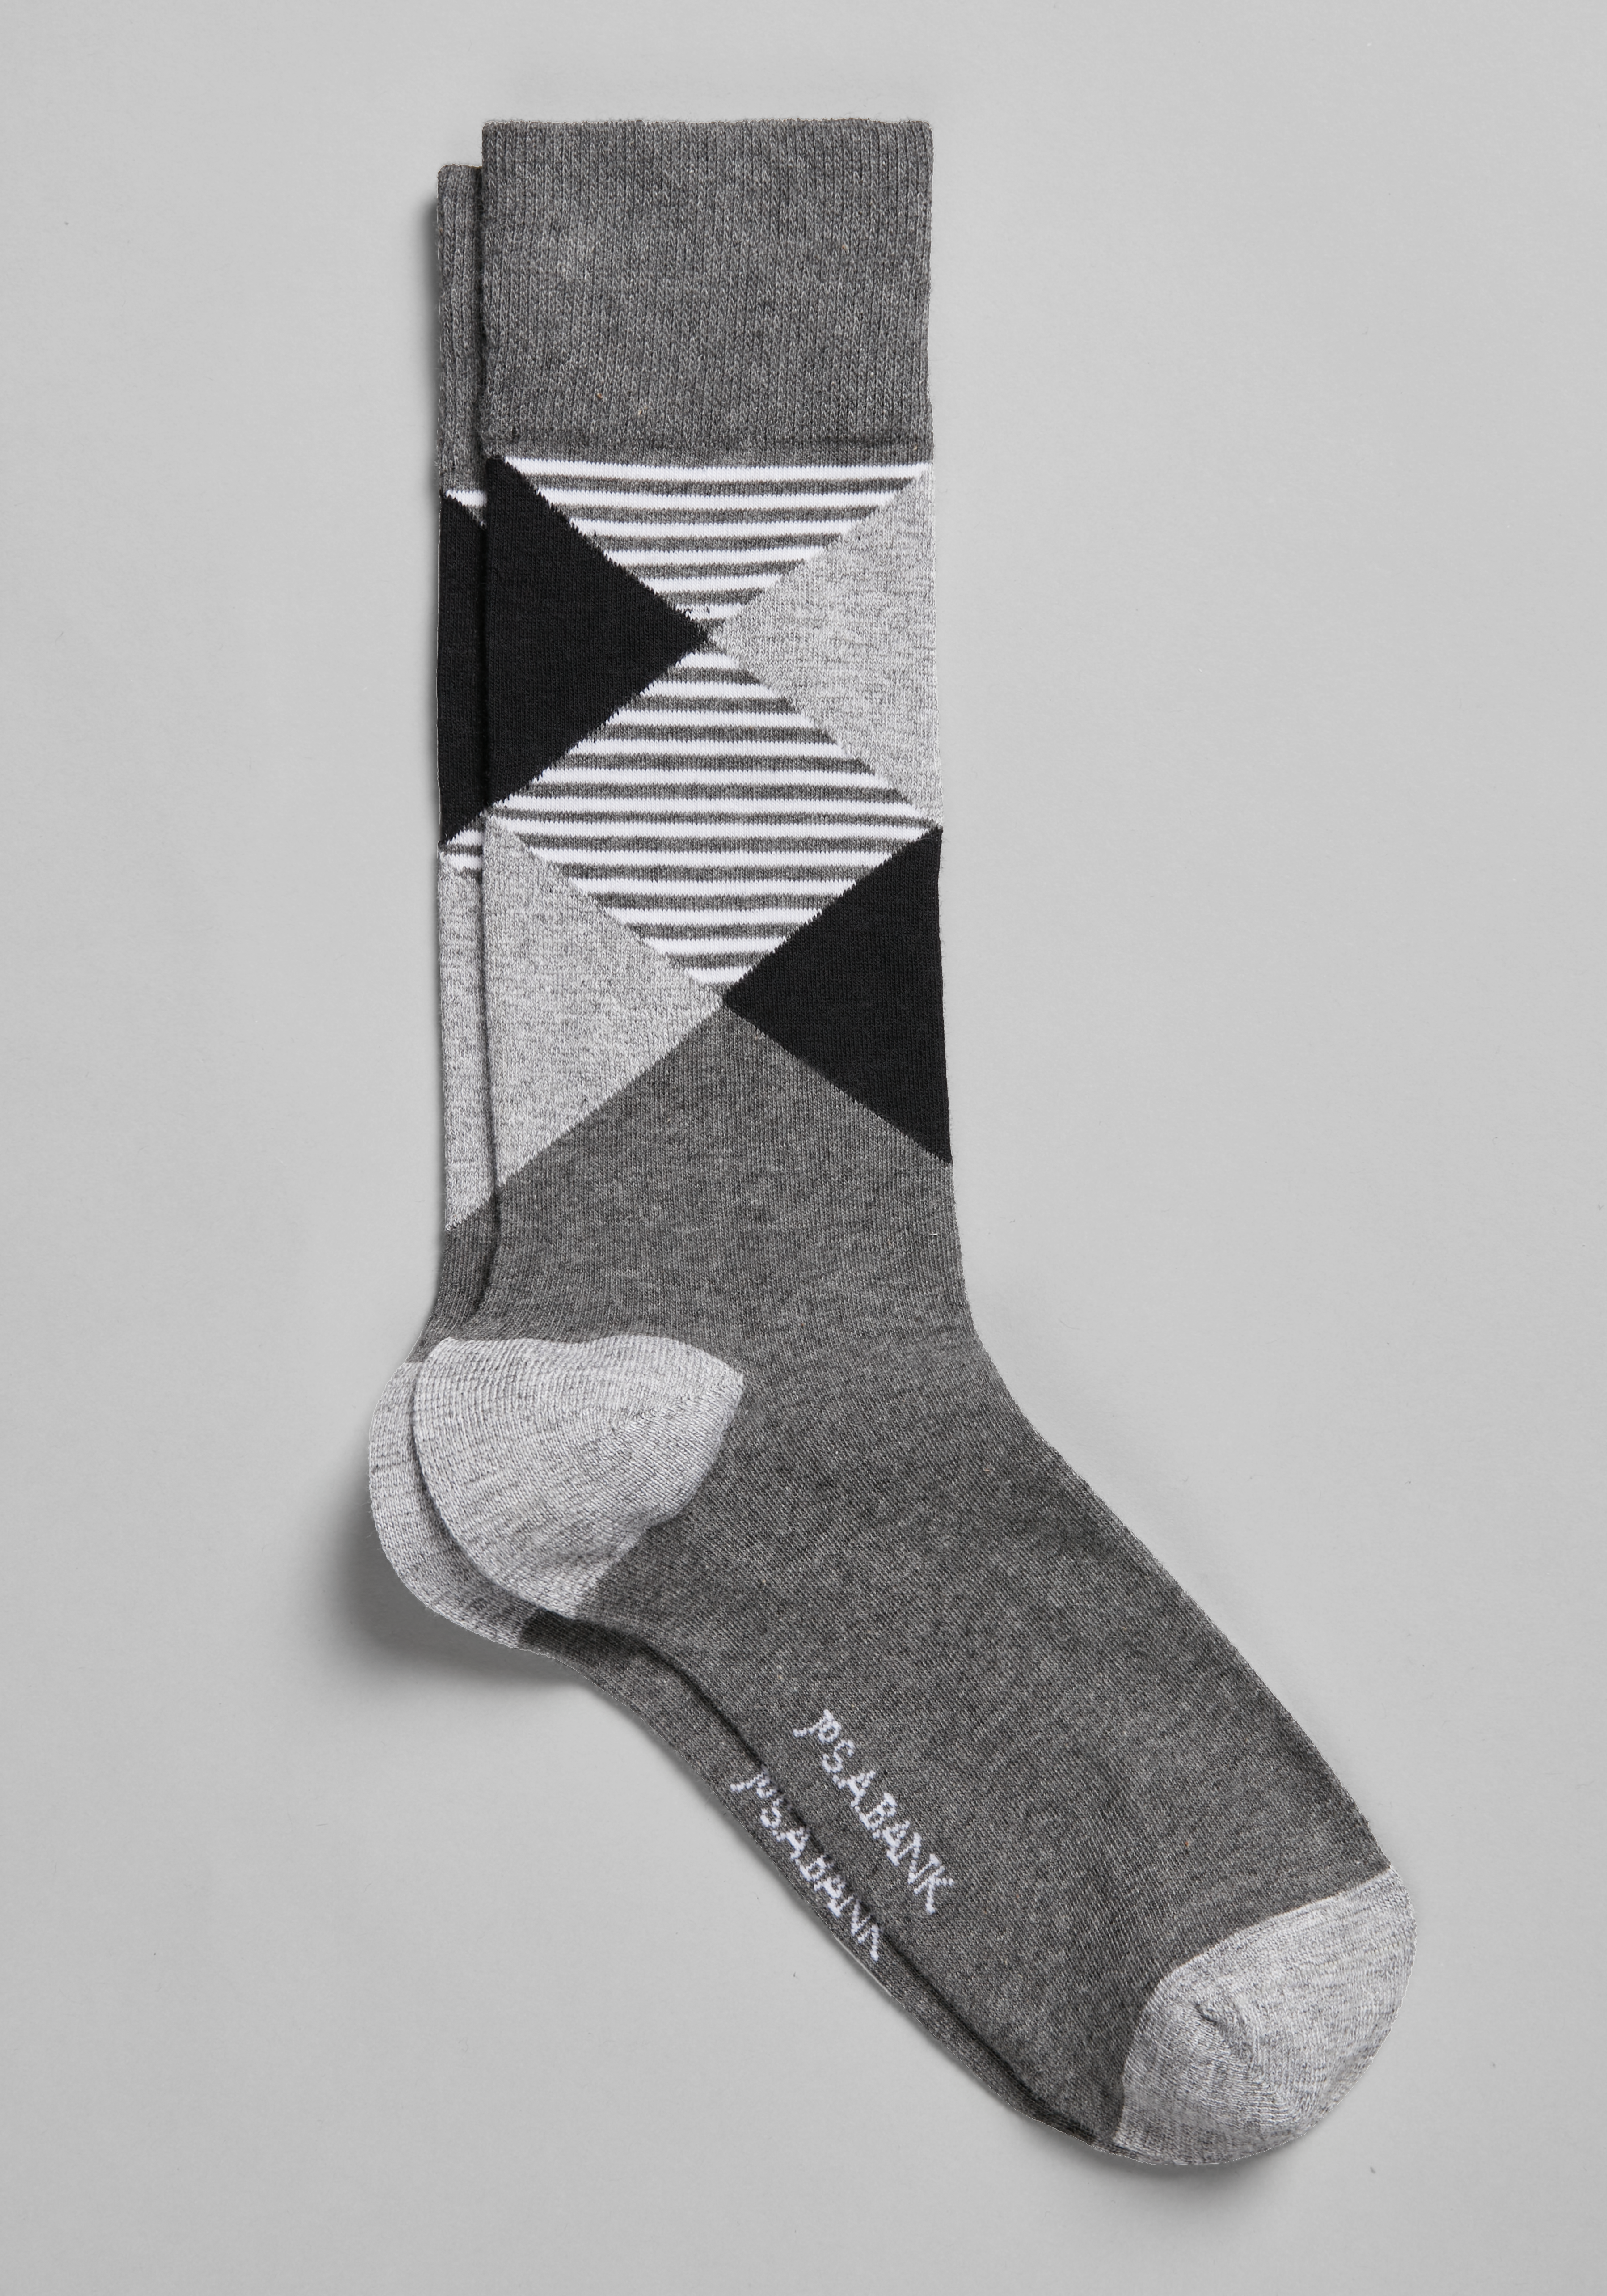 Jos. A. Bank Modern Argyle Socks, 1-Pair - Father's Day Gifts Under $25 ...